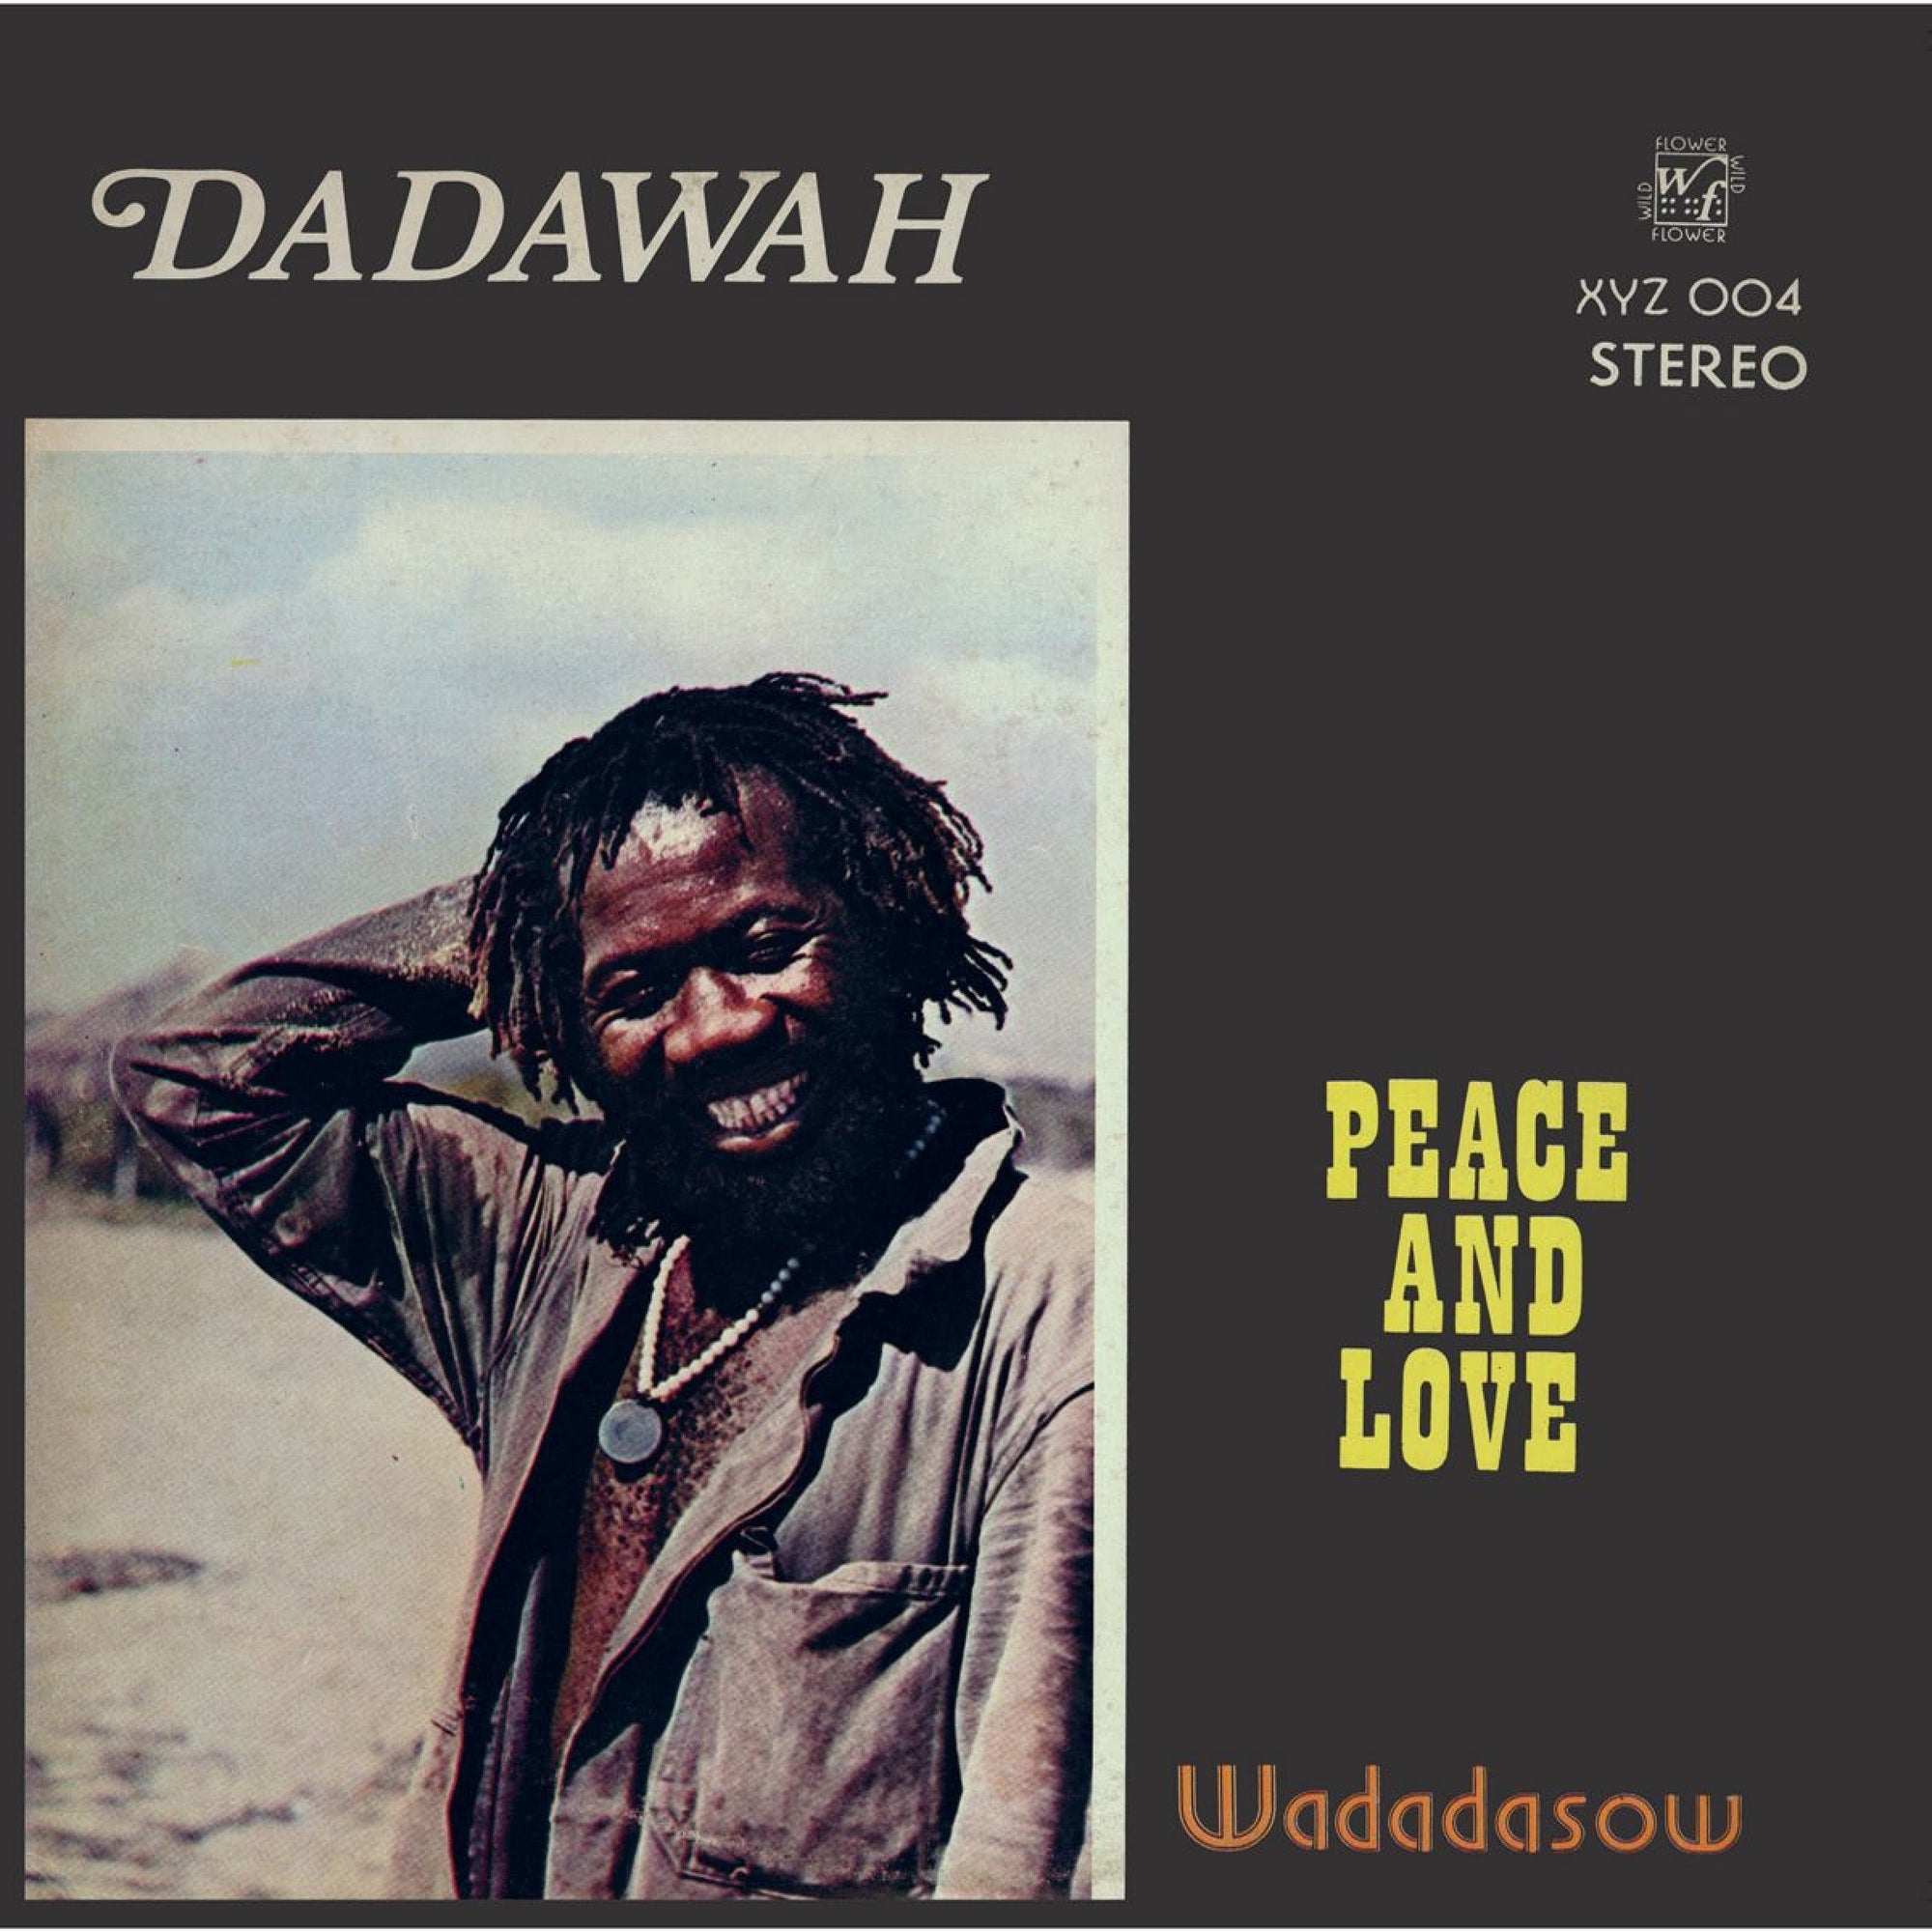 Album cover of Dadawah - Peace and Love by Tandem Coffee Roasters featuring a joyful man with dreadlocks, wearing a dark jacket and smiling broadly against an earth-toned background with bright yellow text.